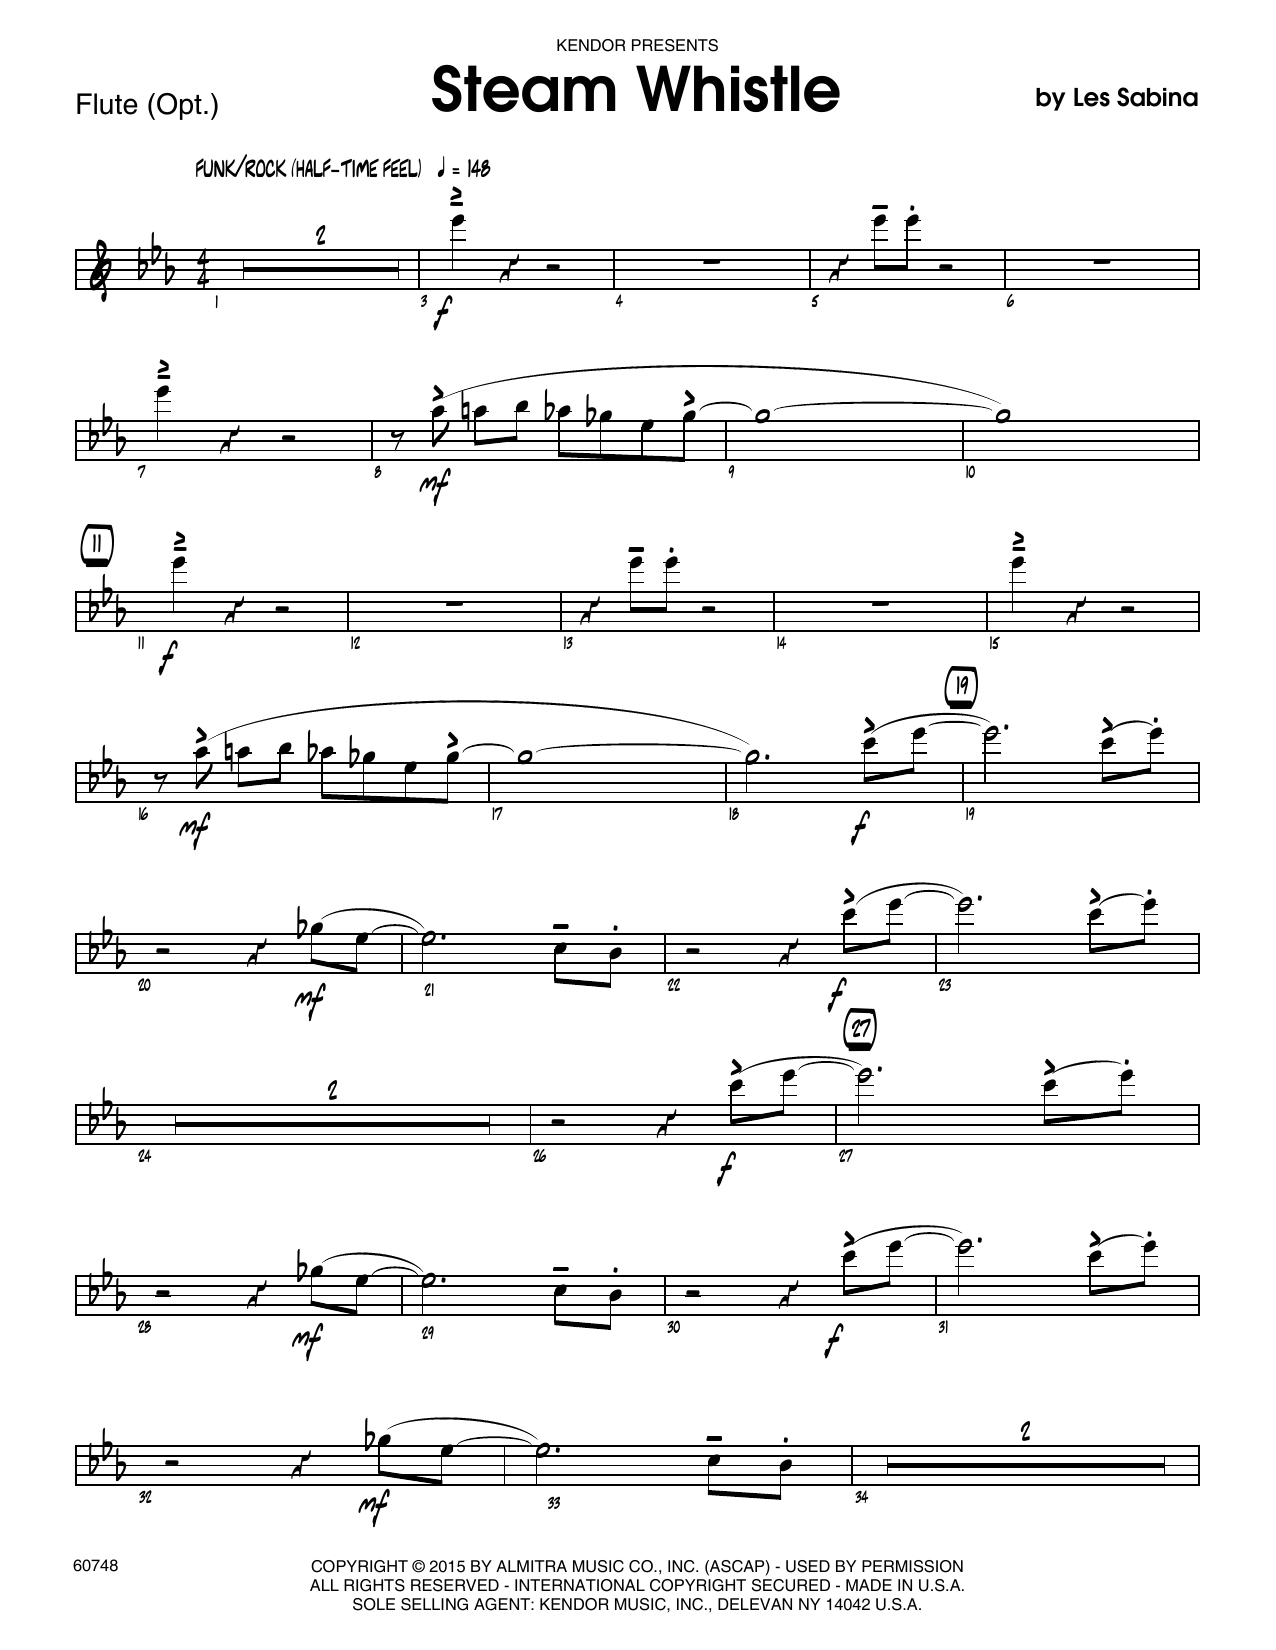 Download Les Sabina Steam Whistle - Flute Sheet Music